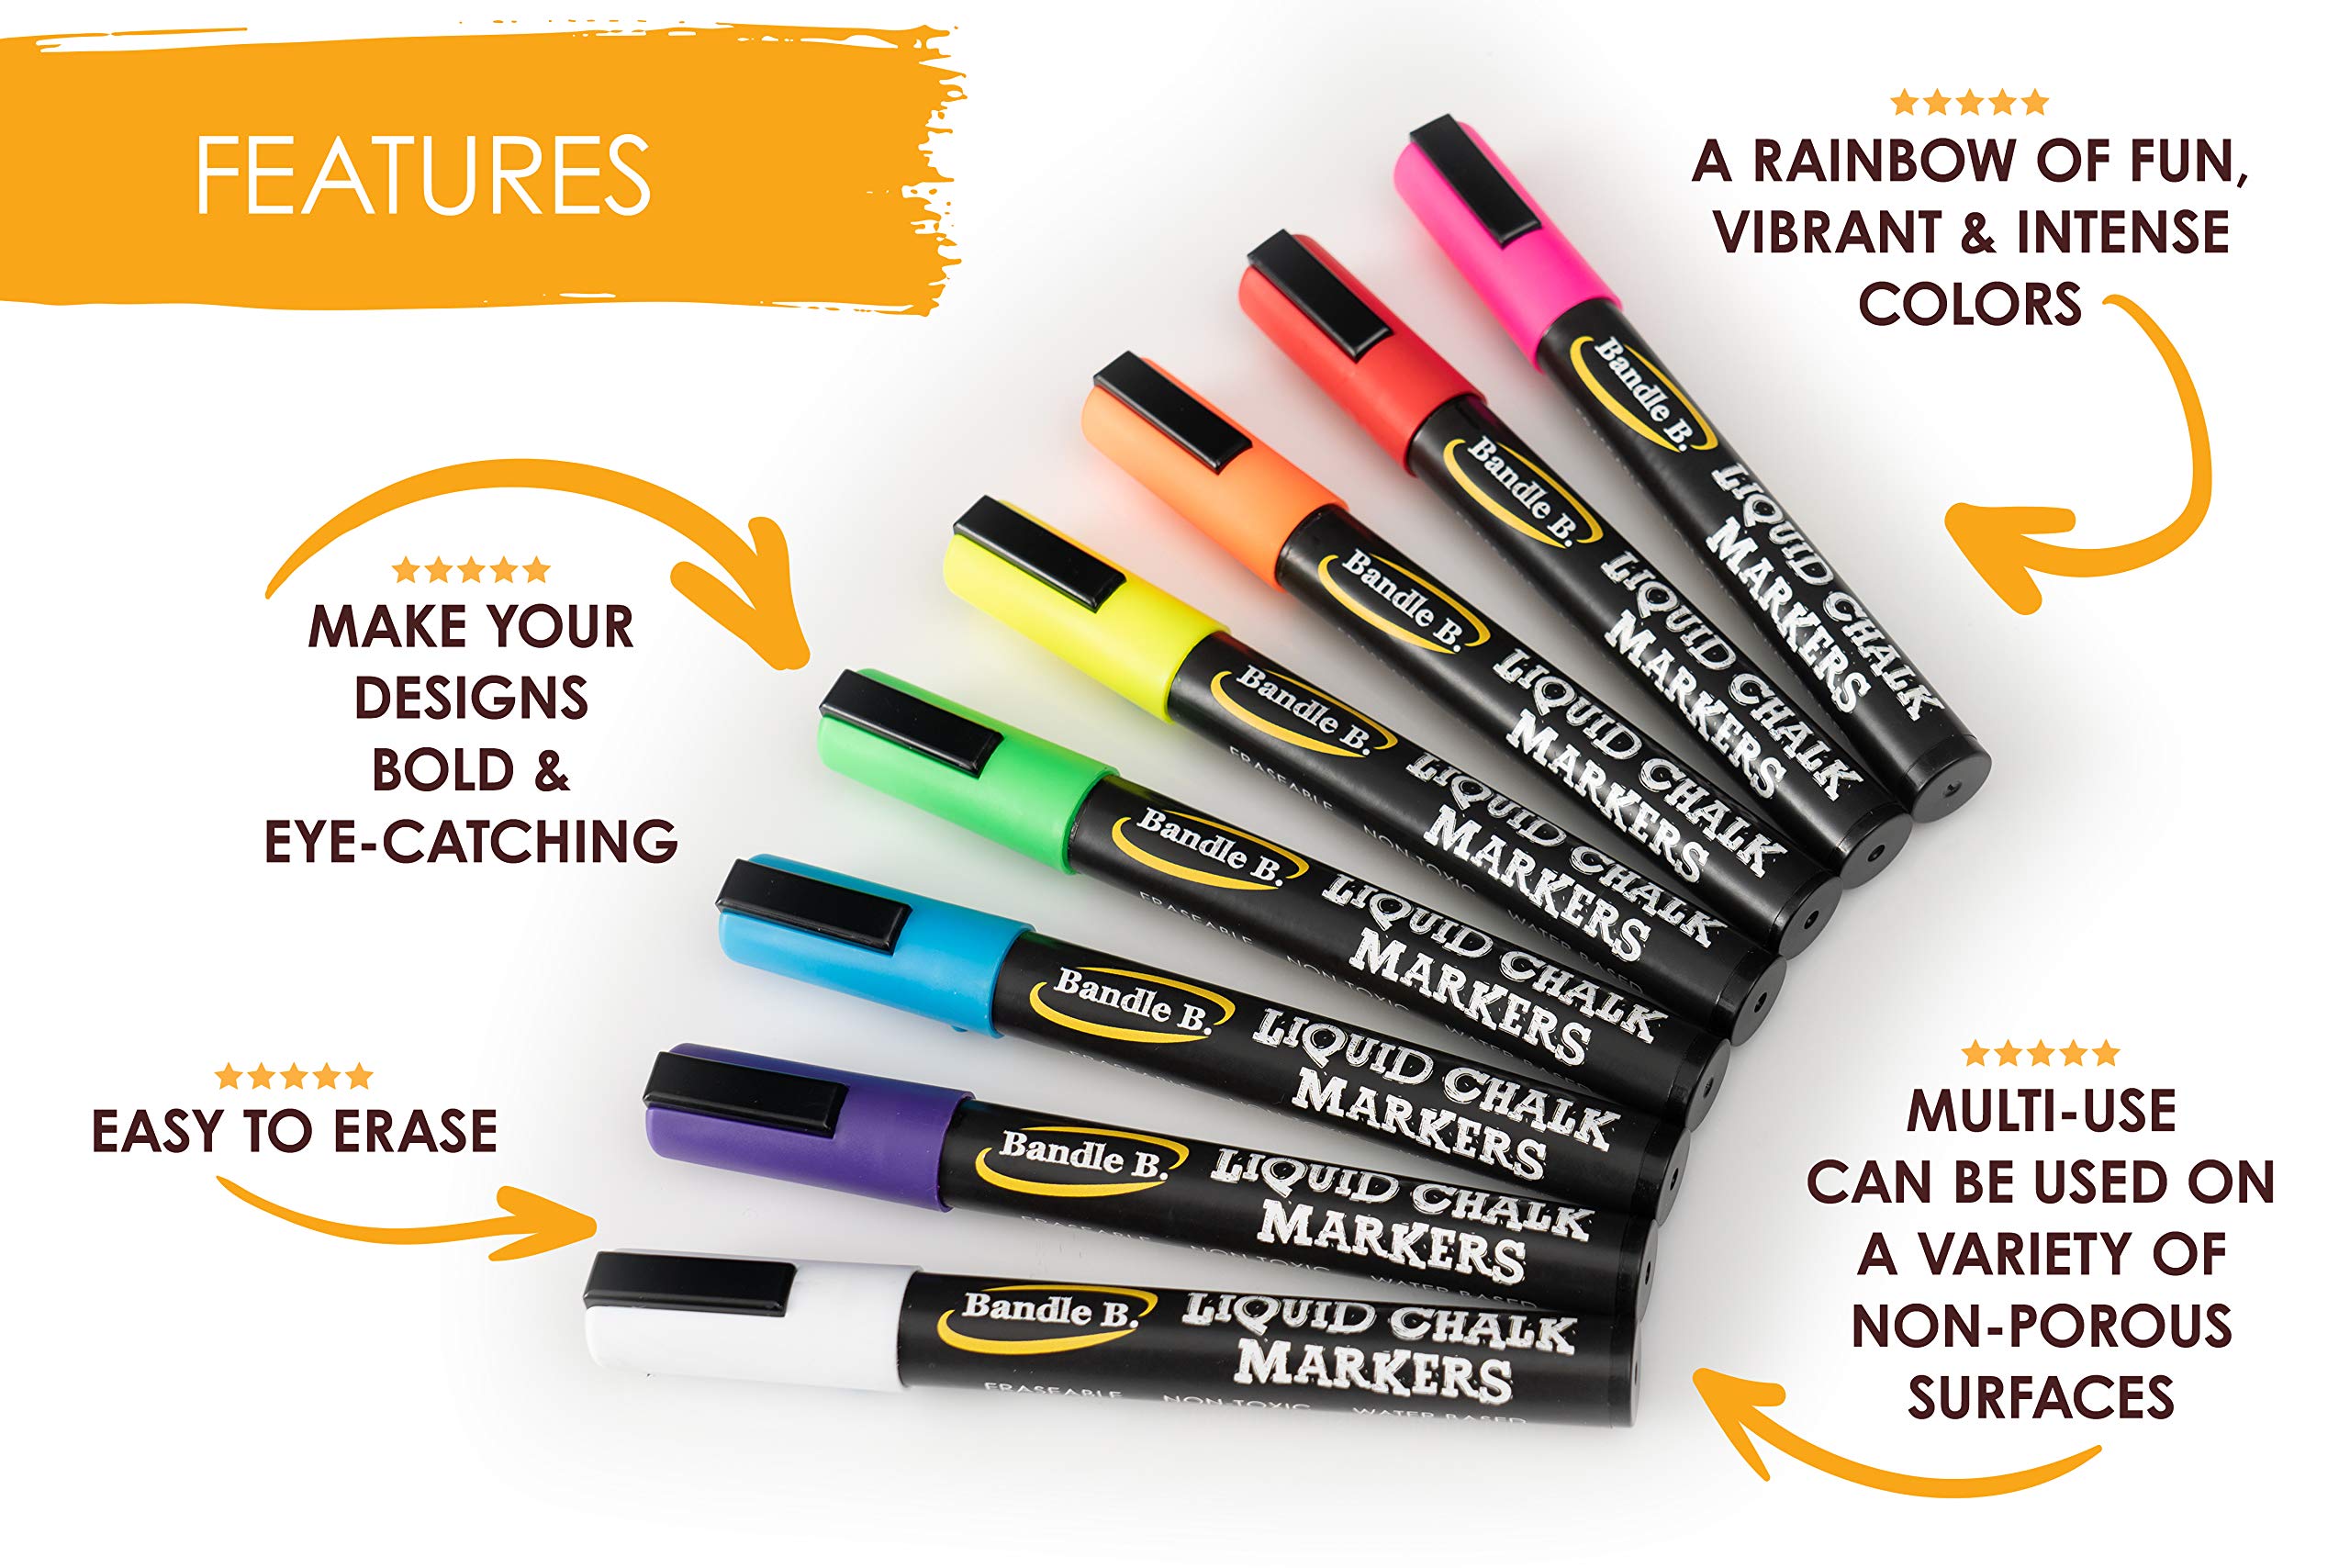 Bandle B. Chalk Markers Vibrant Liquid Chalk Pens for Chalkboard, Whiteboard, Car Window 8 Pack - image 4 of 7